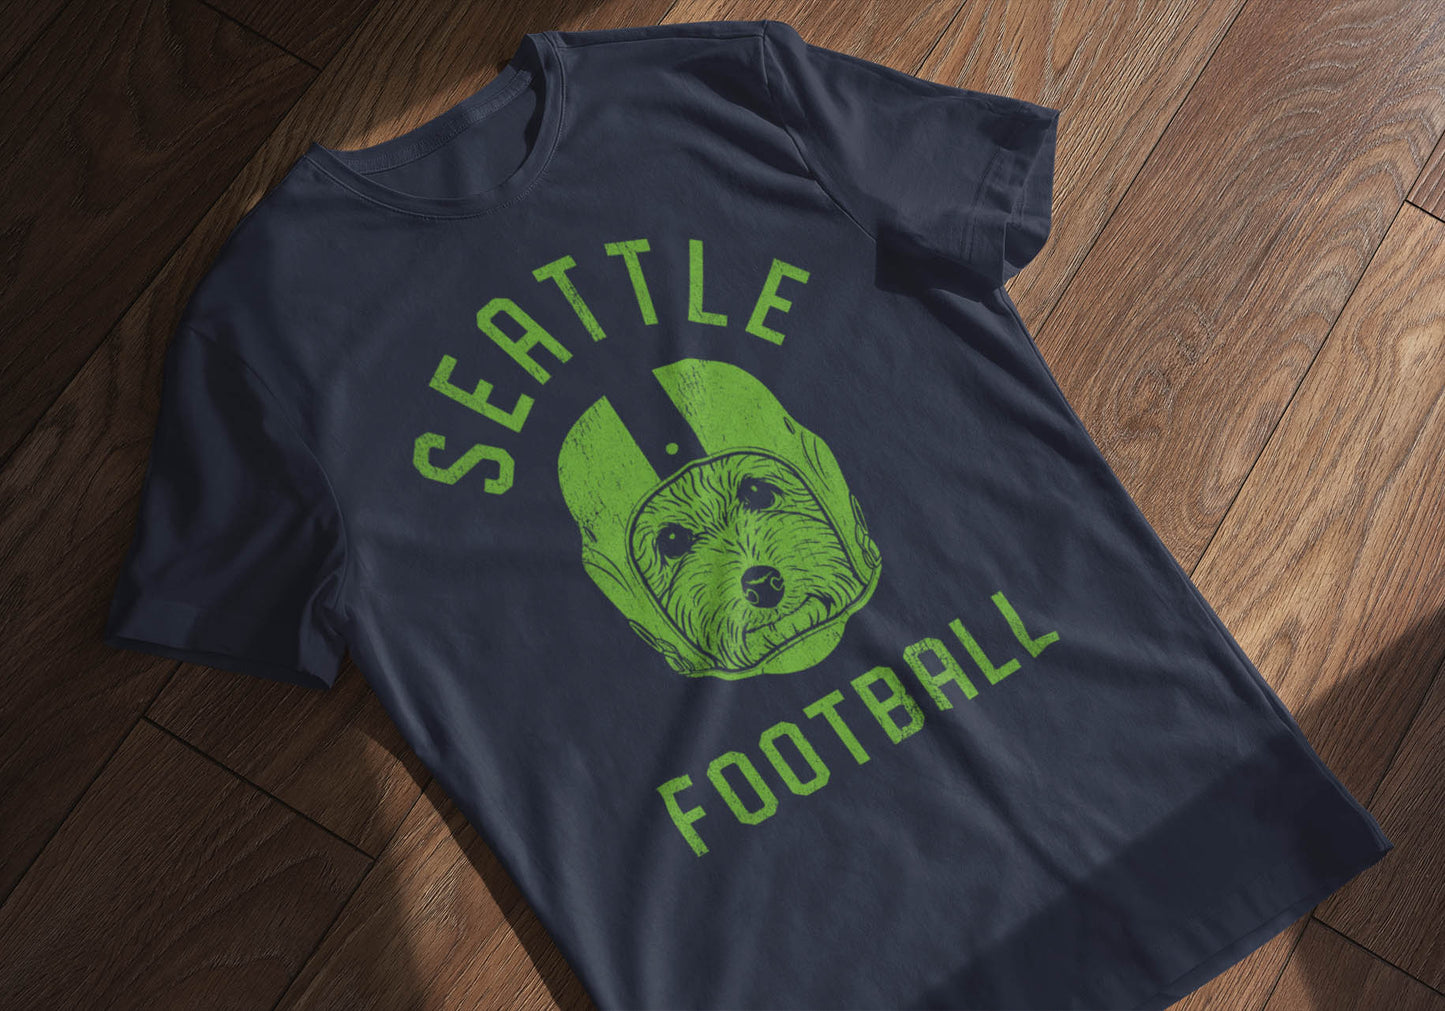 Seattle Football Poodle T-Shirt